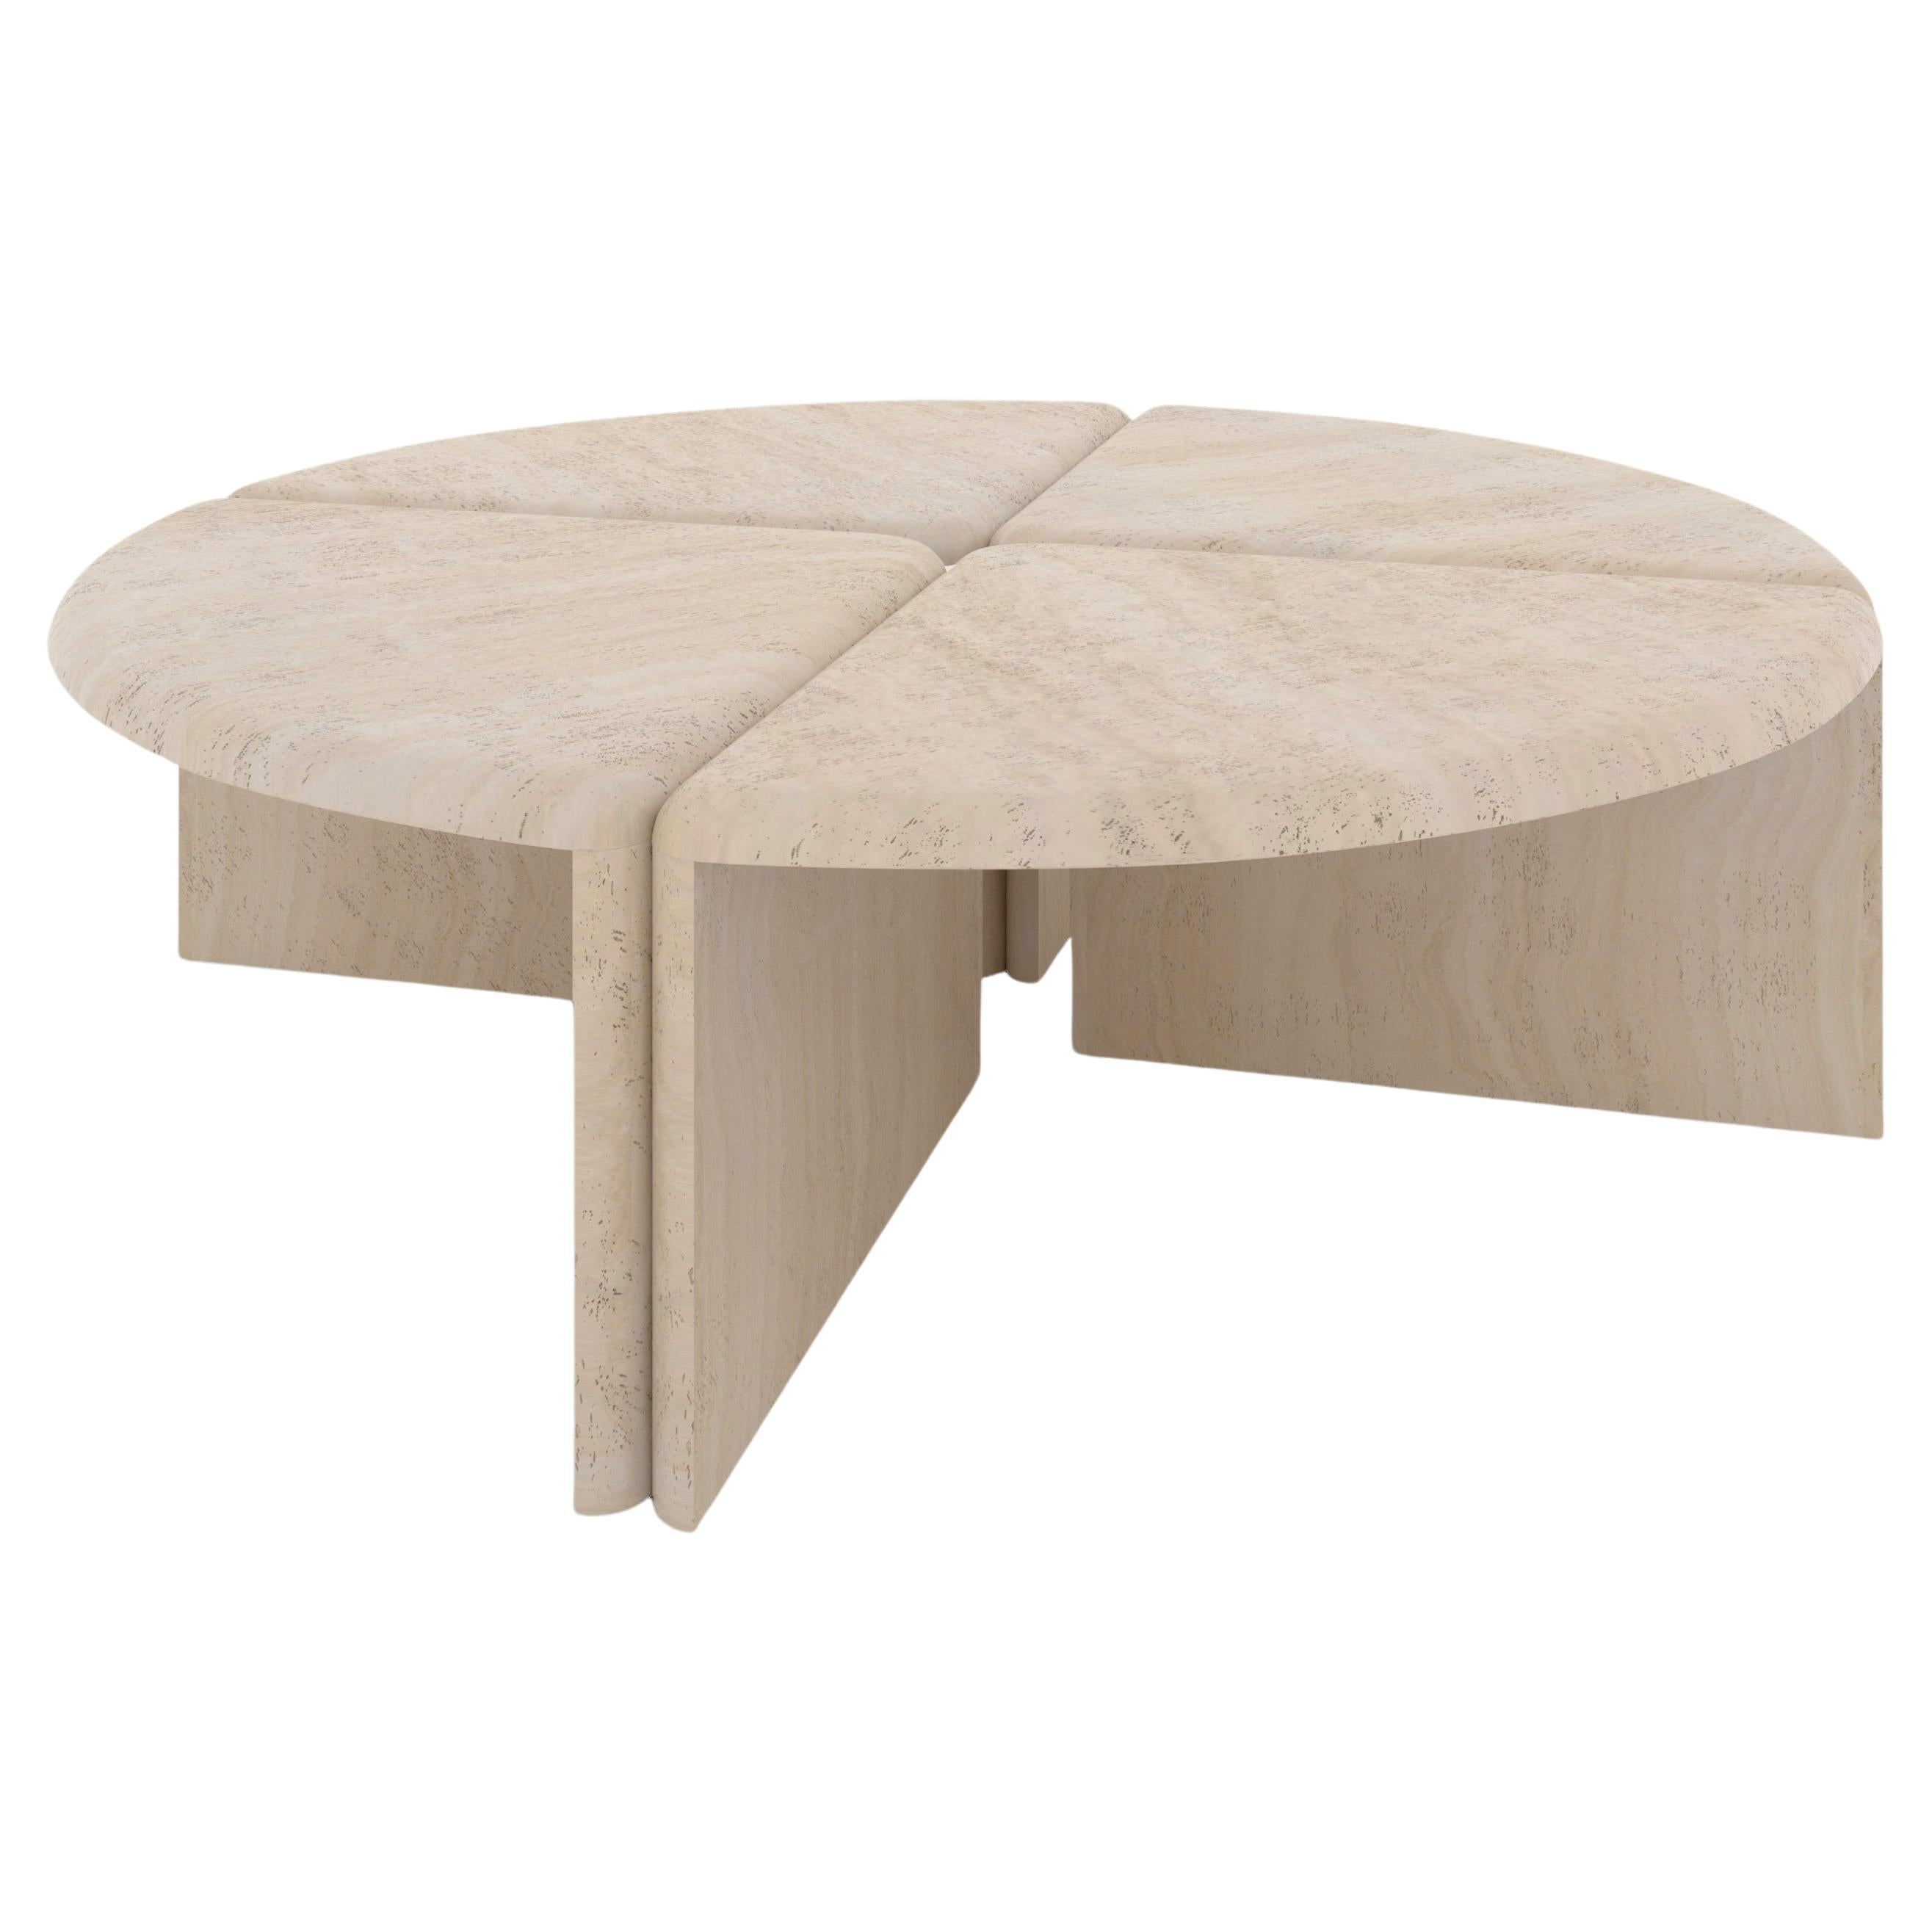 Lily Round Navona Travertine Coffee Table by Fred and Juul For Sale